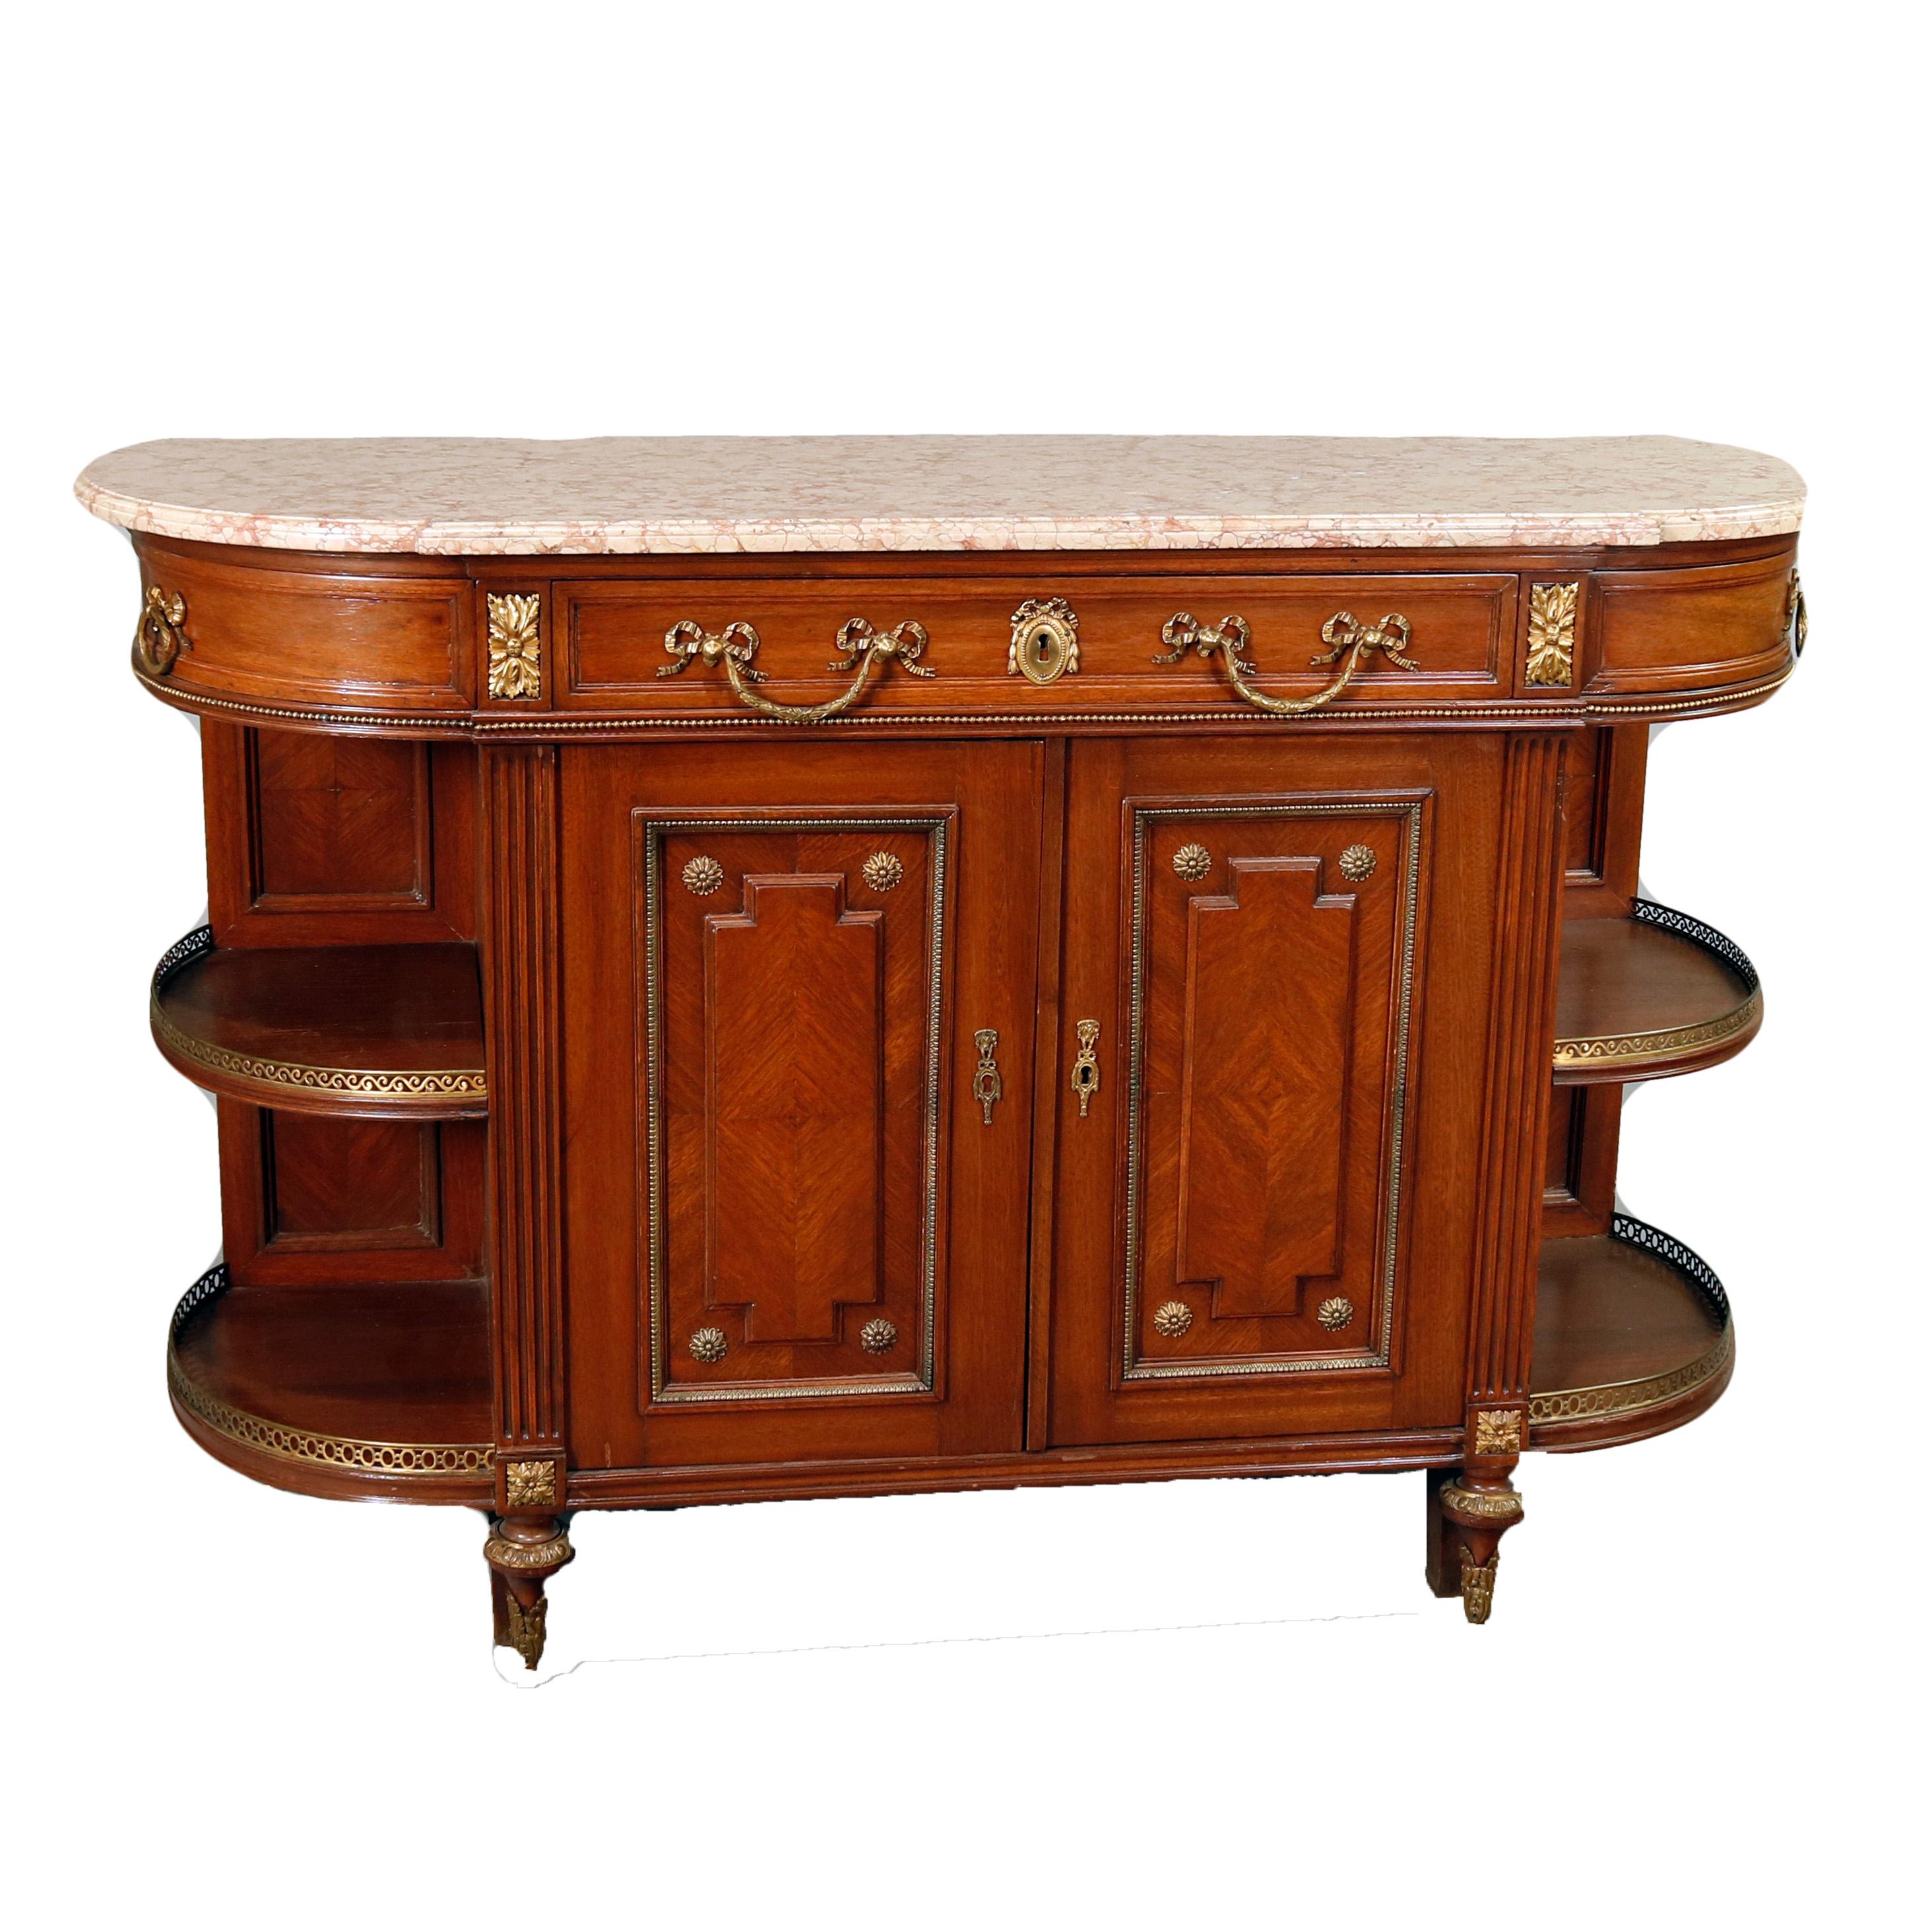 A vintage French Louis XVI sideboard offers shaped and beveled top surmounting mahogany demilune form case having frieze with two central drawers flanked by quarter curve drawers over lower double door central cabinet having bookmatched panels with